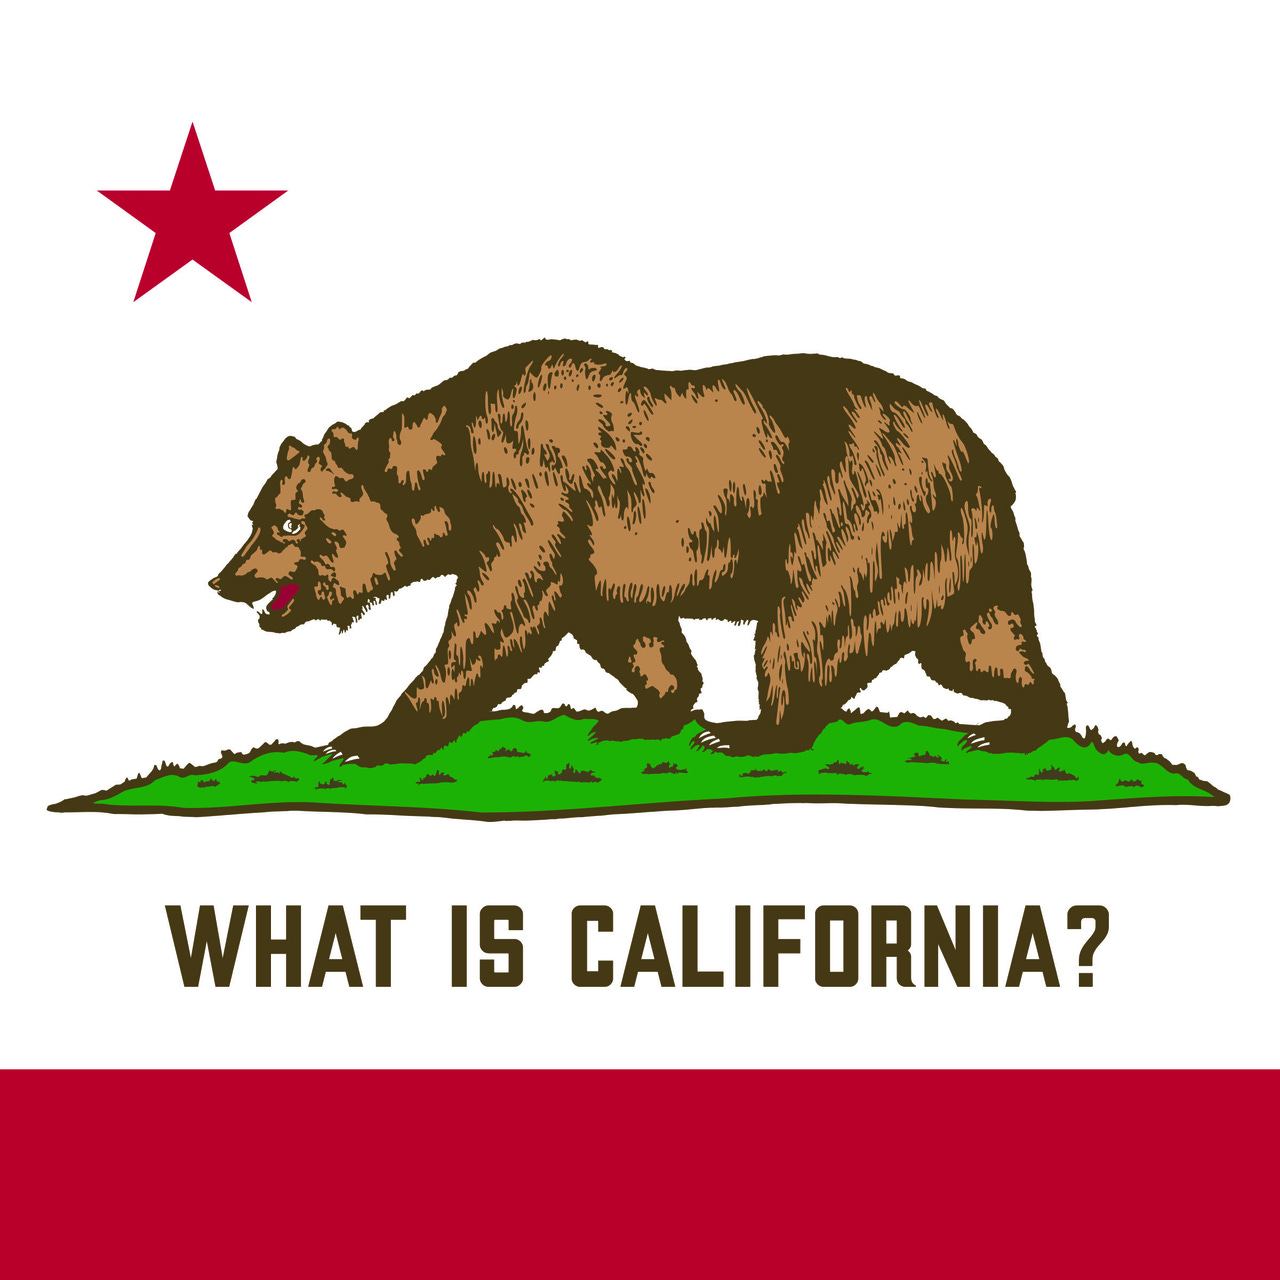 What is California?